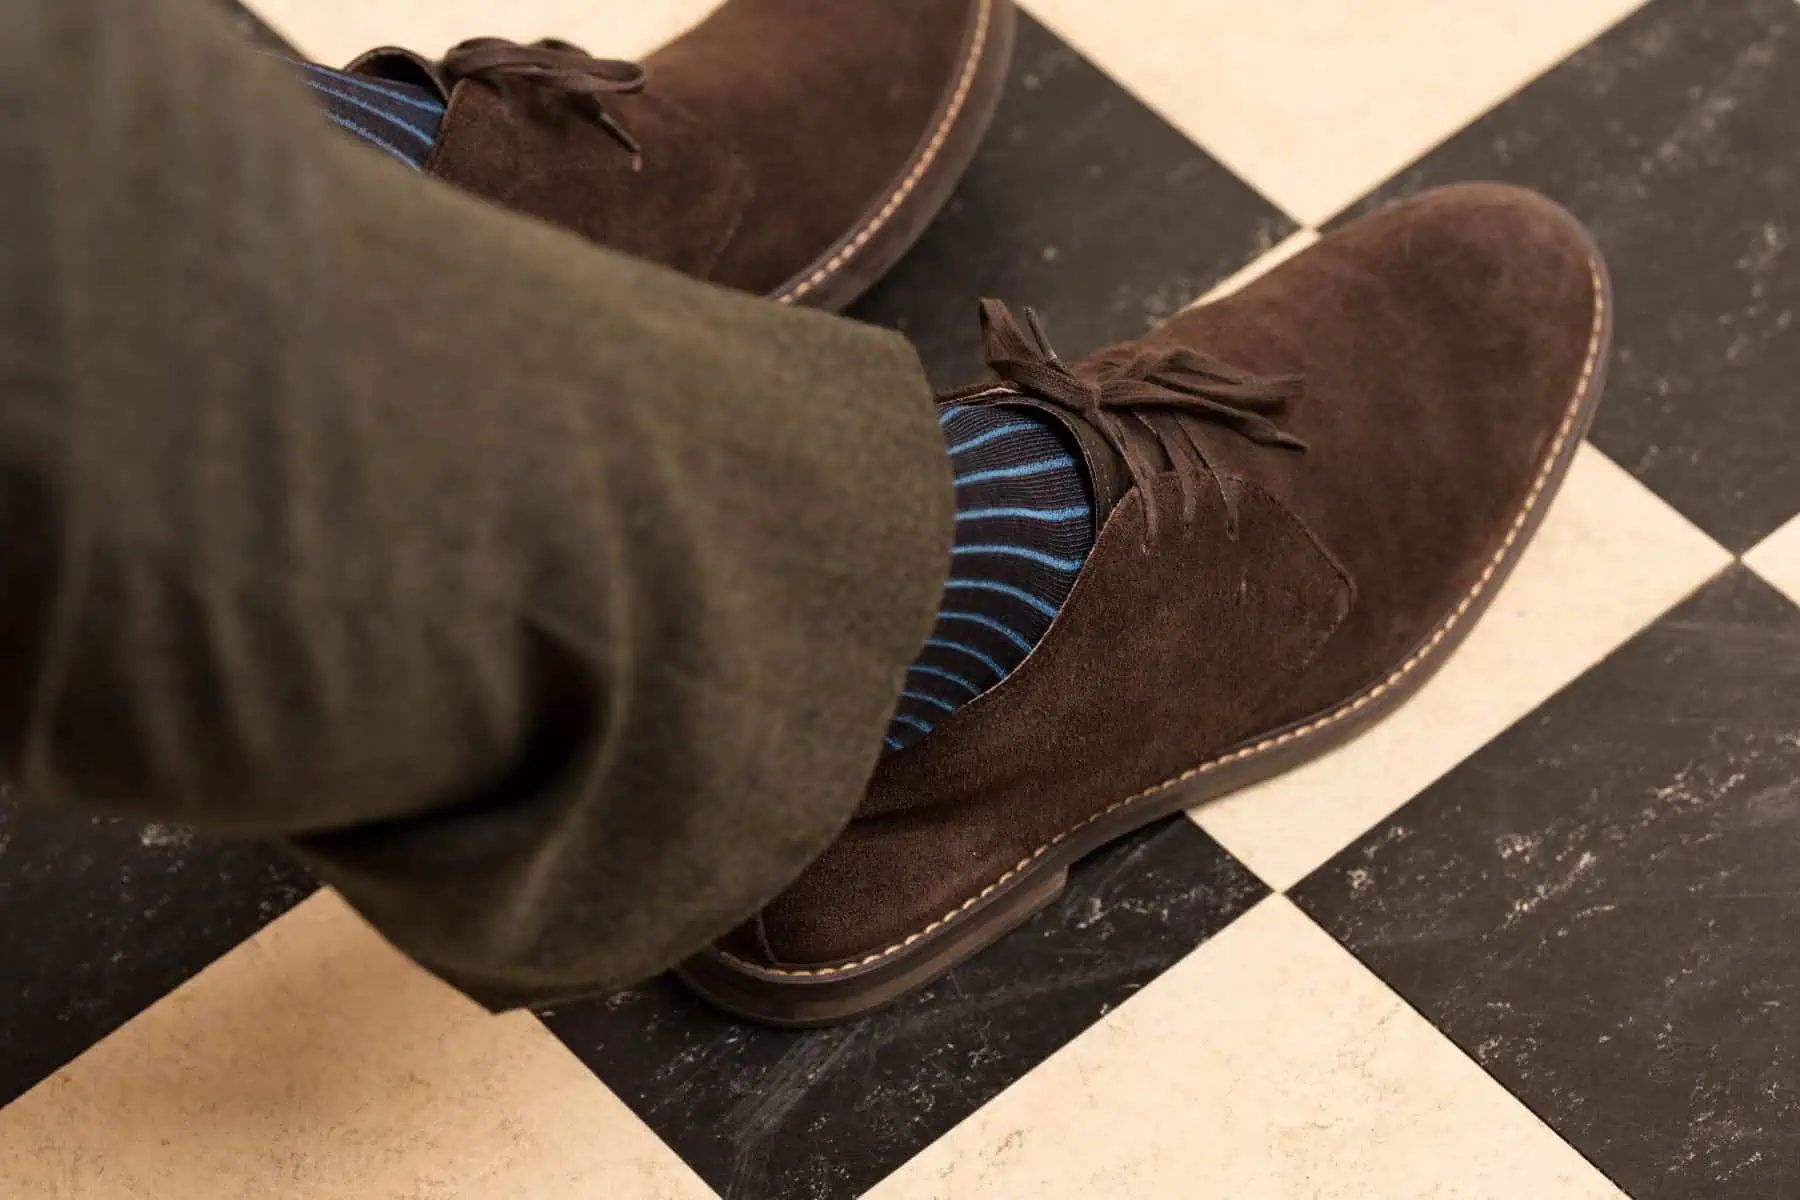 A photo of Fort Belvedere Brown and Bright Blue Socks with Suede Derbies